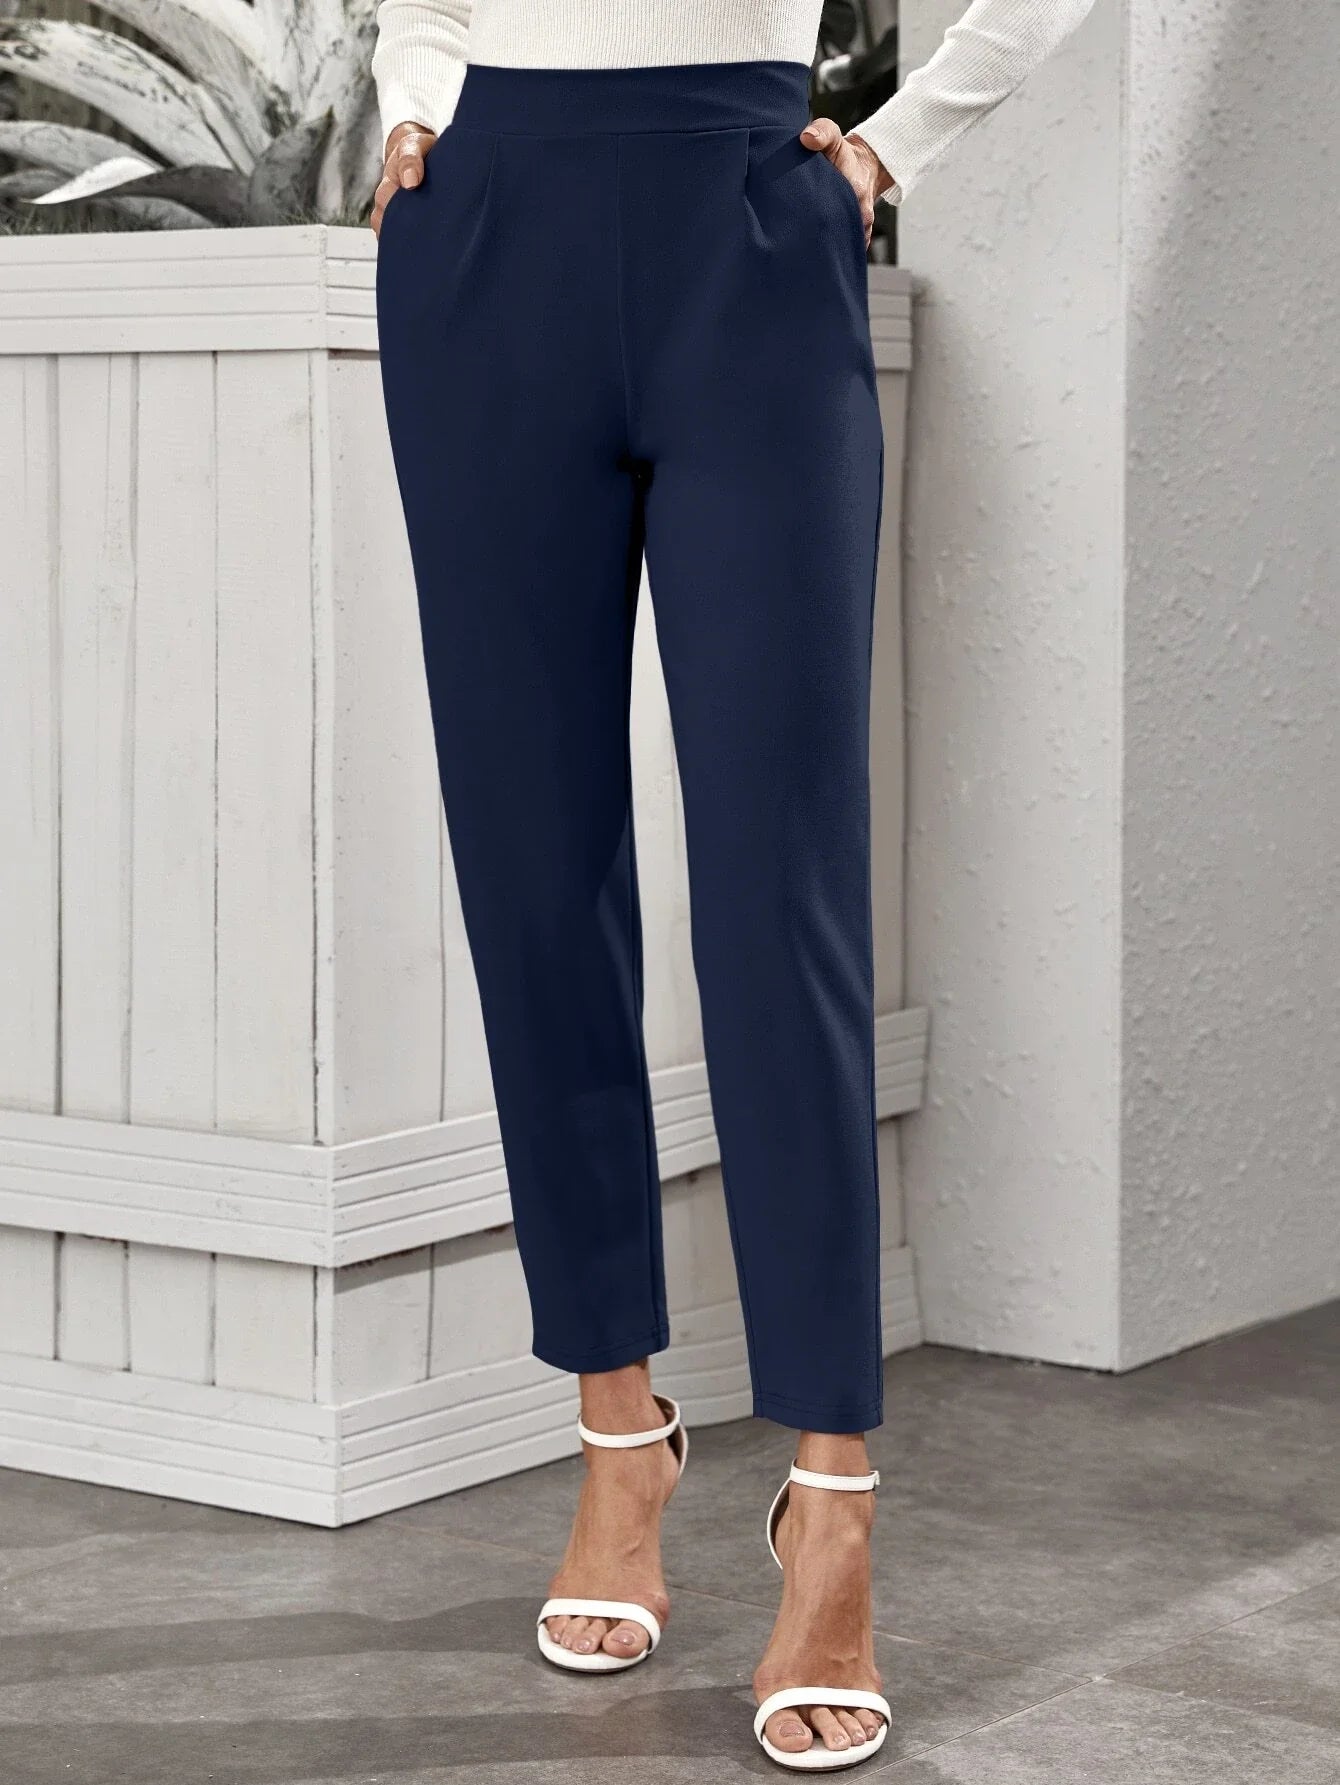 Buy Shein High Rise Slant Pocket Tapered Pants in Pakistan